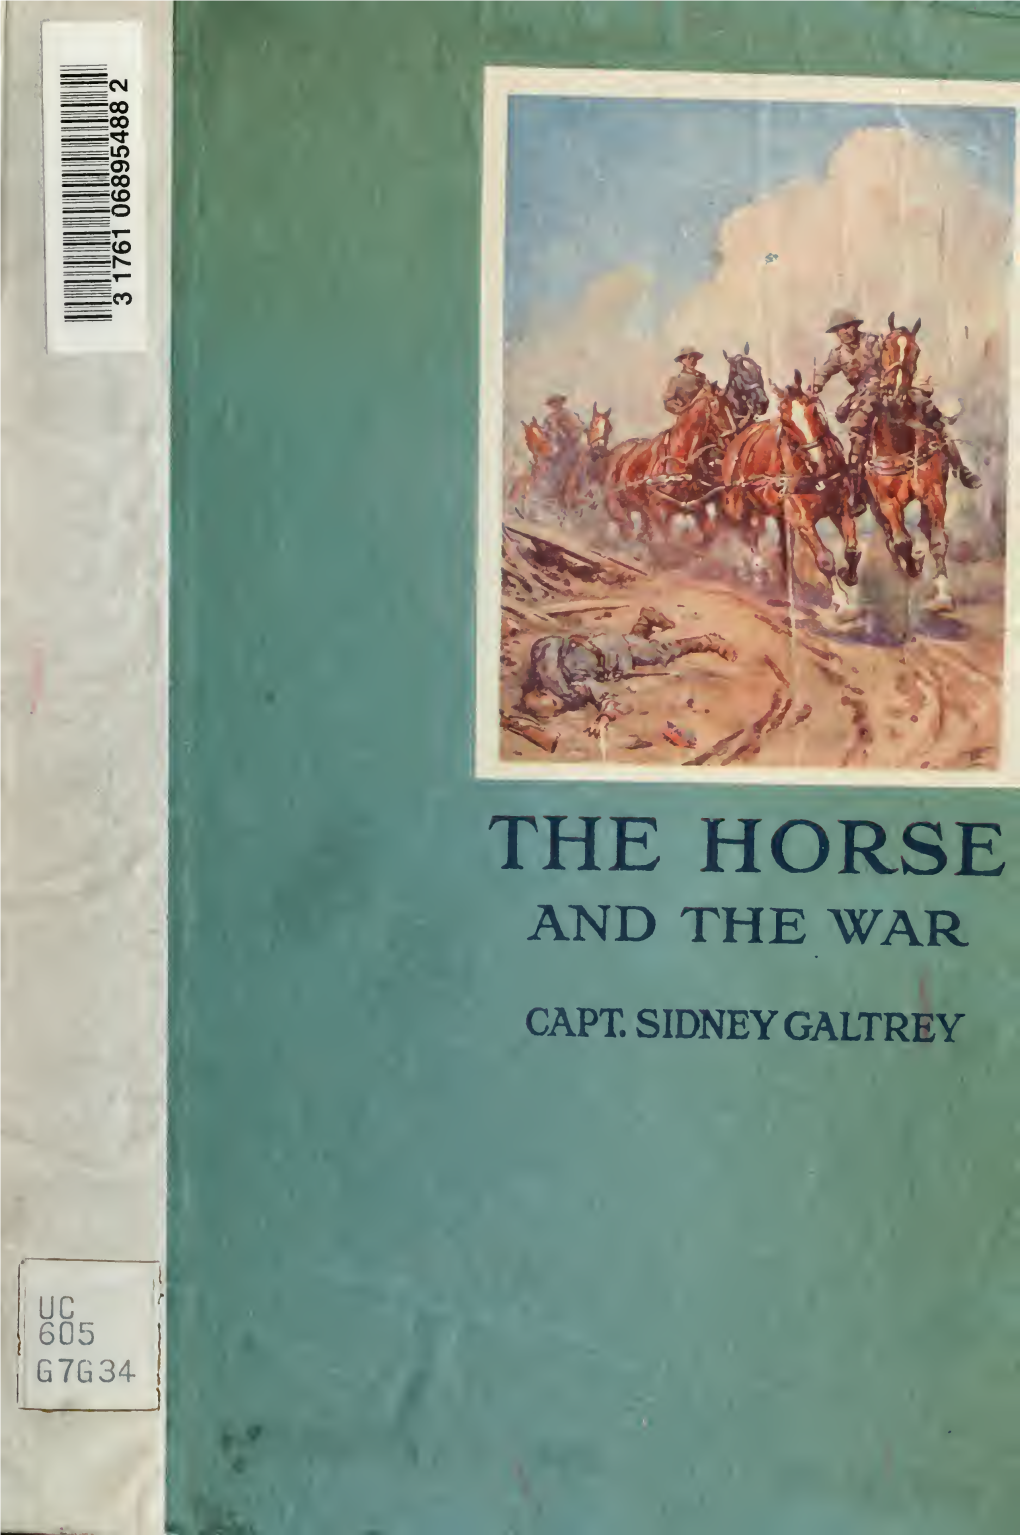 The Horse and the War. Illustrated from Drawings by Lionel Edwards And